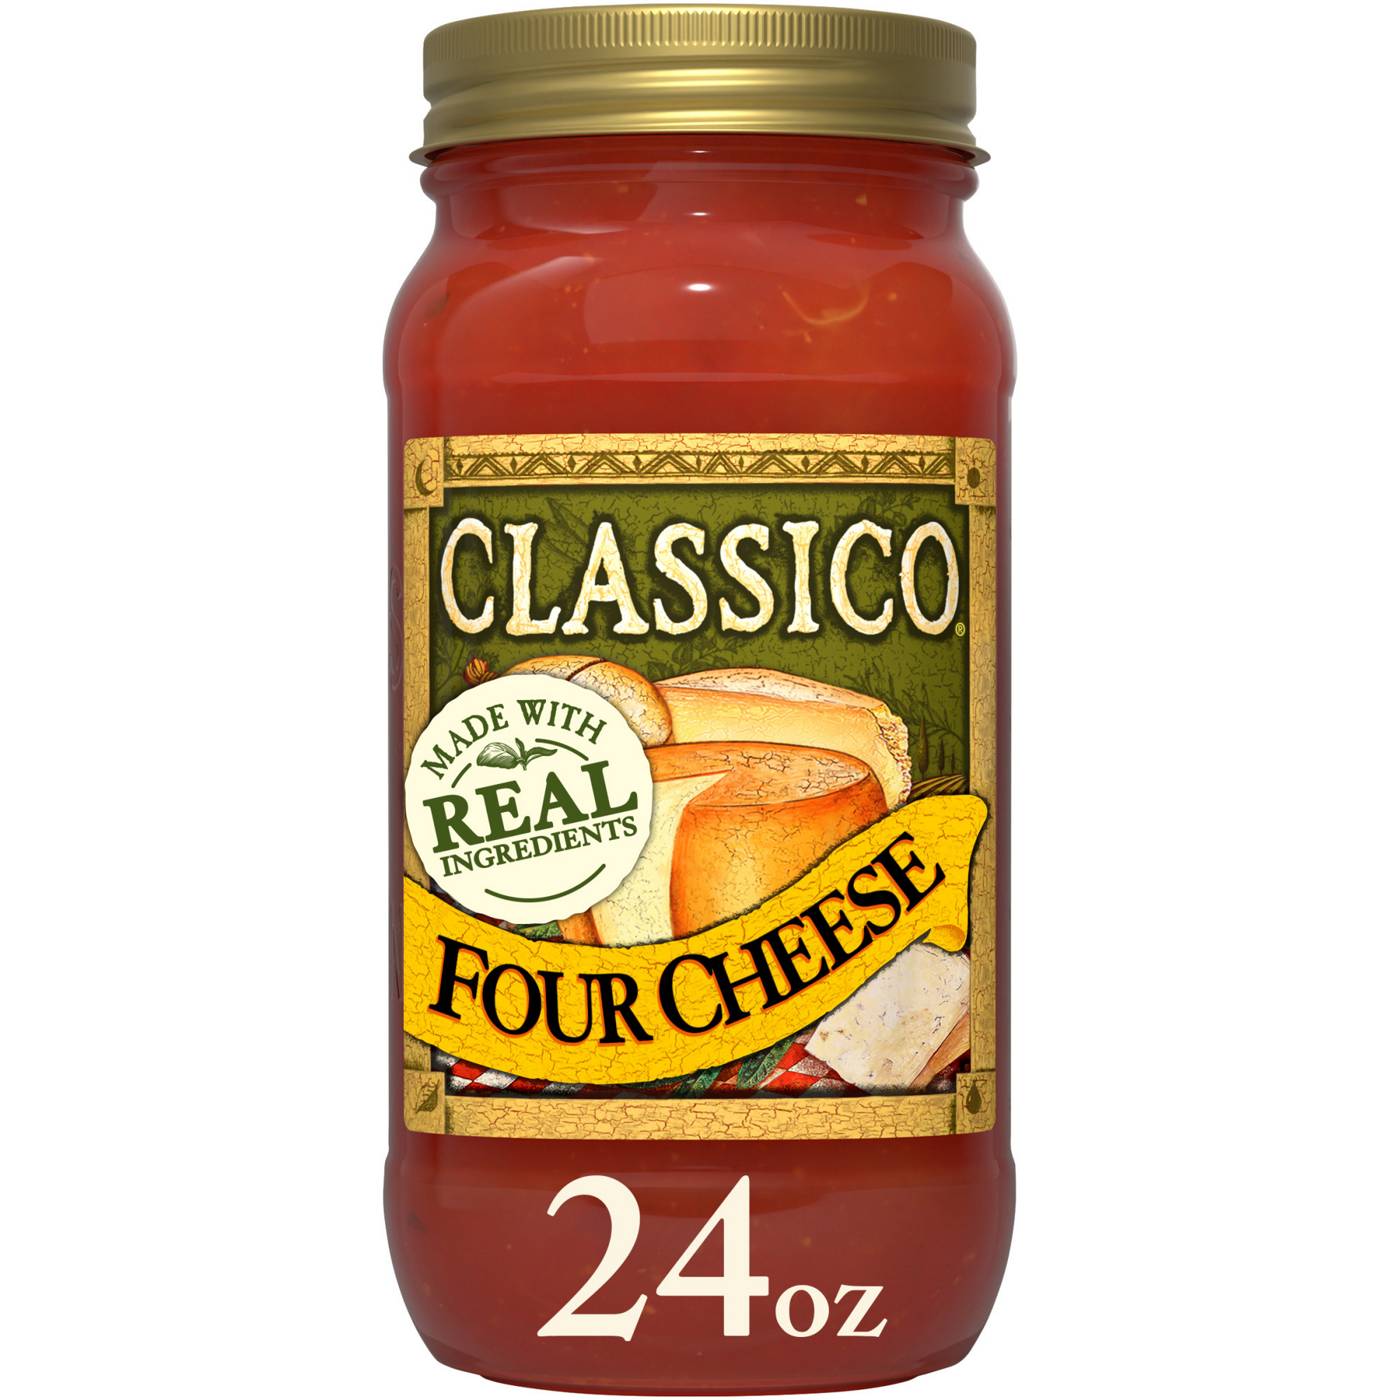 Classico Four Cheese Pasta Sauce; image 1 of 9